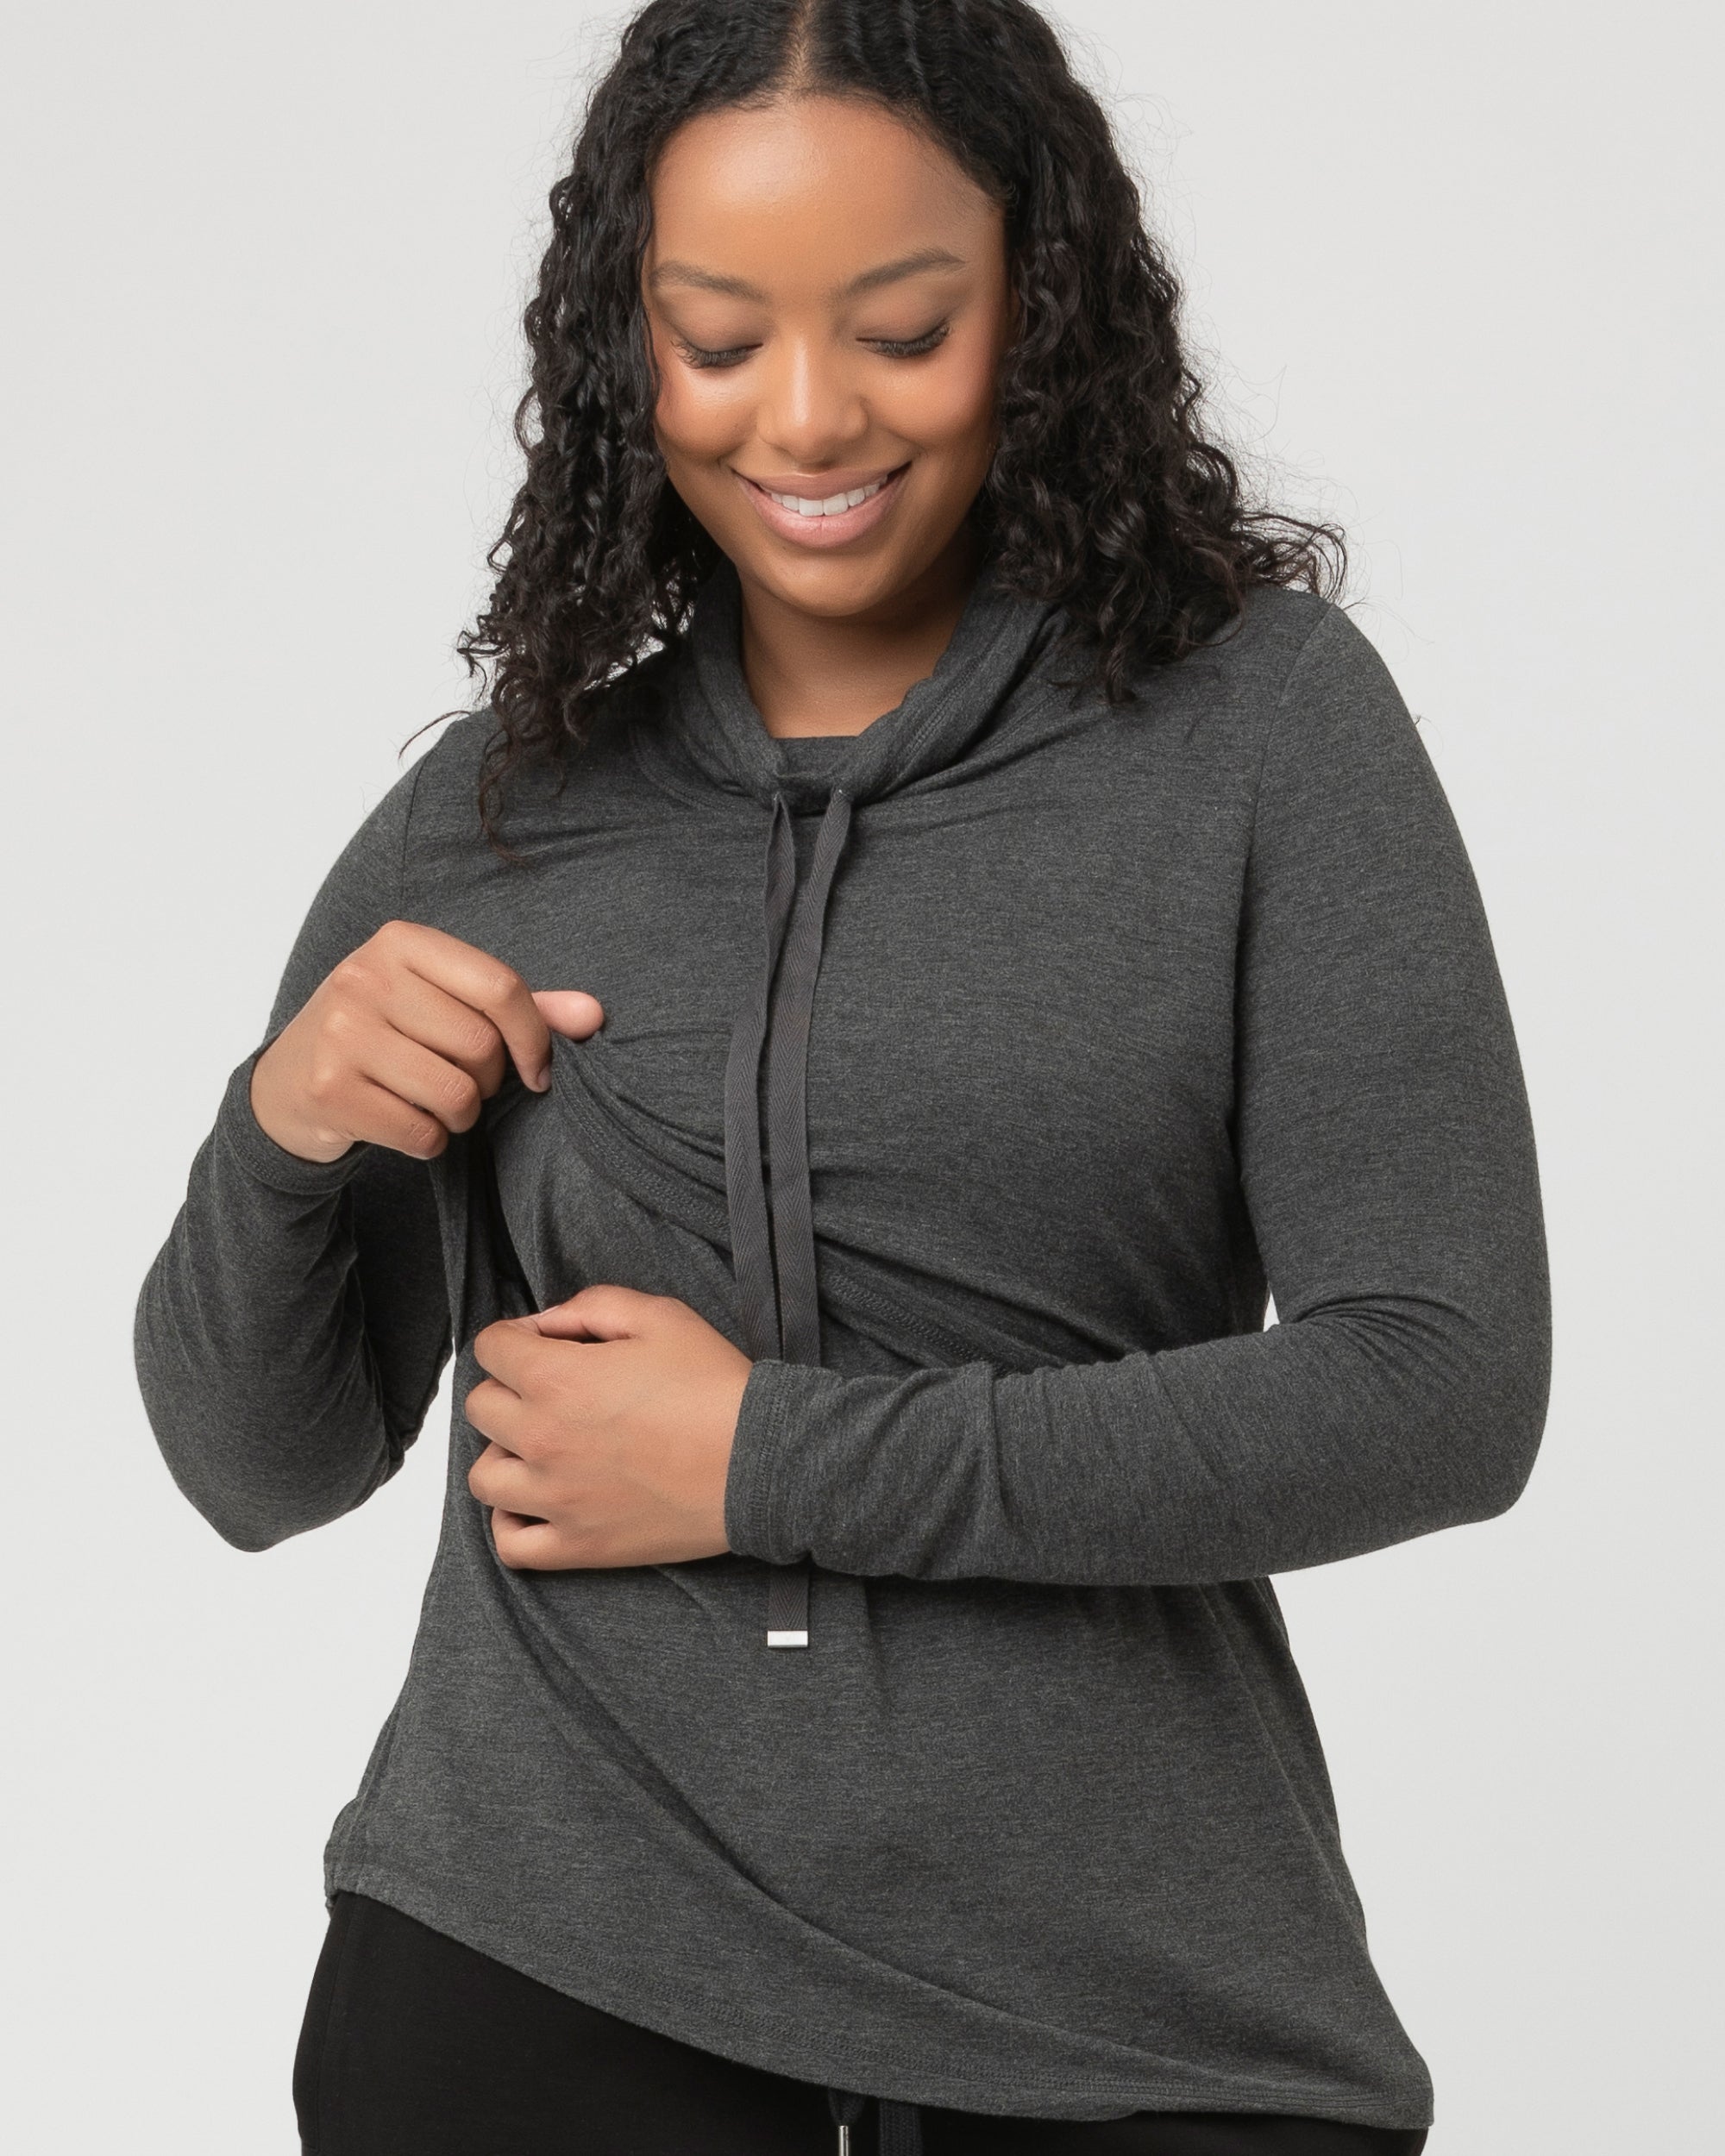 Terry Nursing Top Charcoal Marle